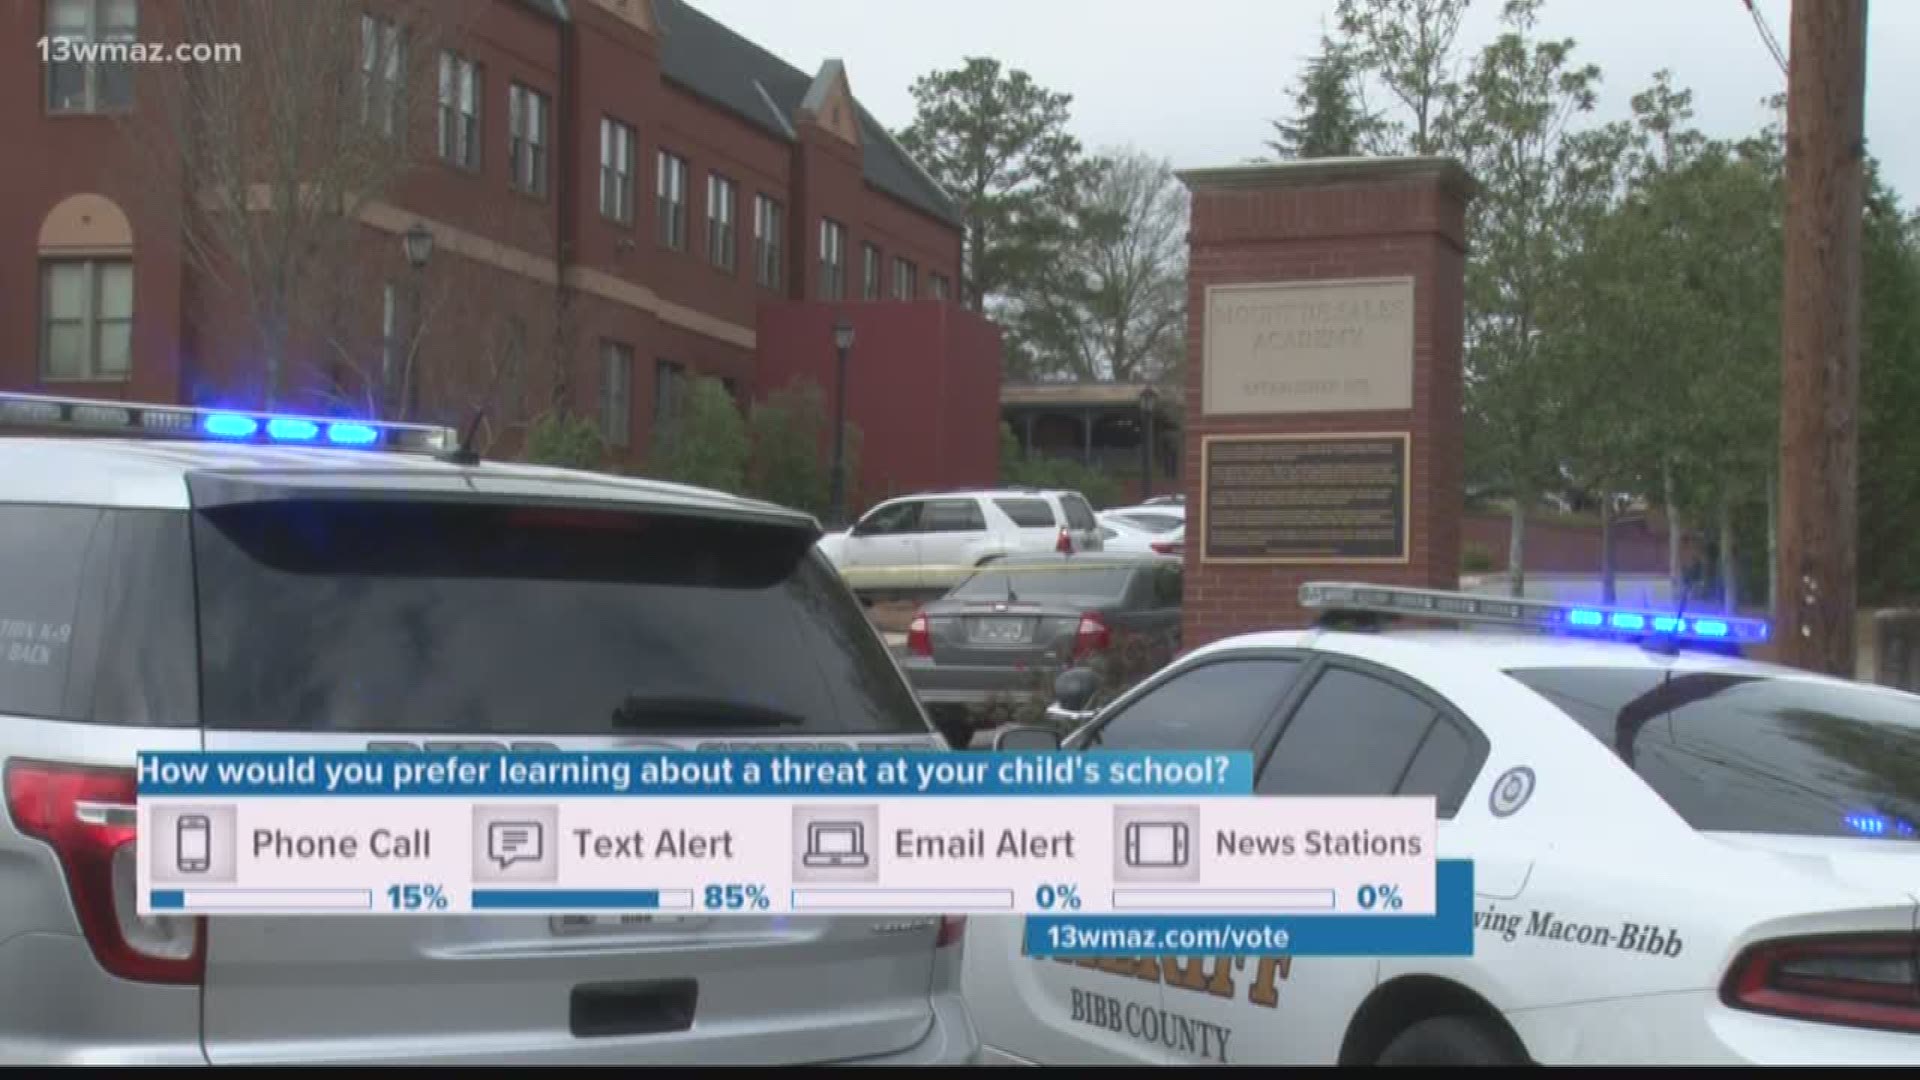 According to Sgt. Linda Howard with the Bibb Sheriff’s Office, they were initially notified about a bomb threat at the school, but administrators at the scene later clarified and told her it was a shooting threat.